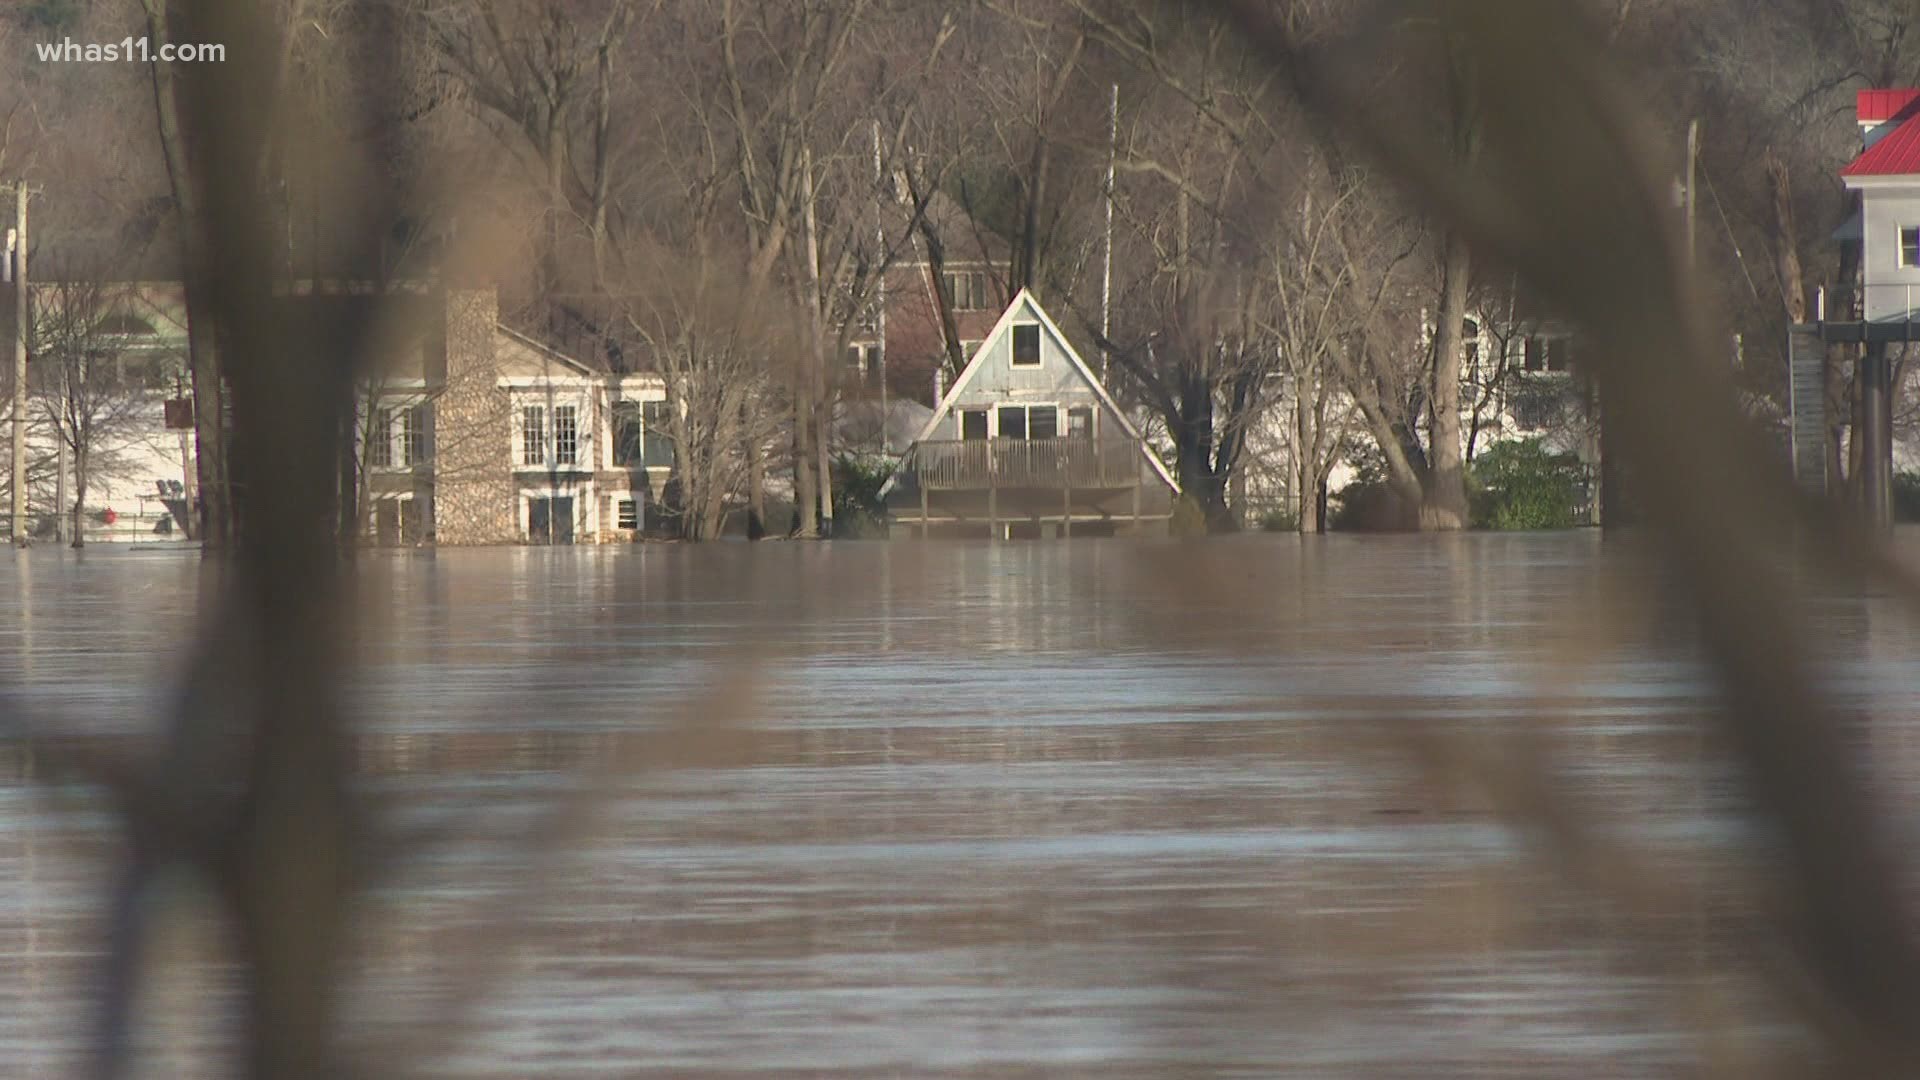 The small southern Indiana town said they are surprised they weren't as impacted as other areas from Ohio River flooding.